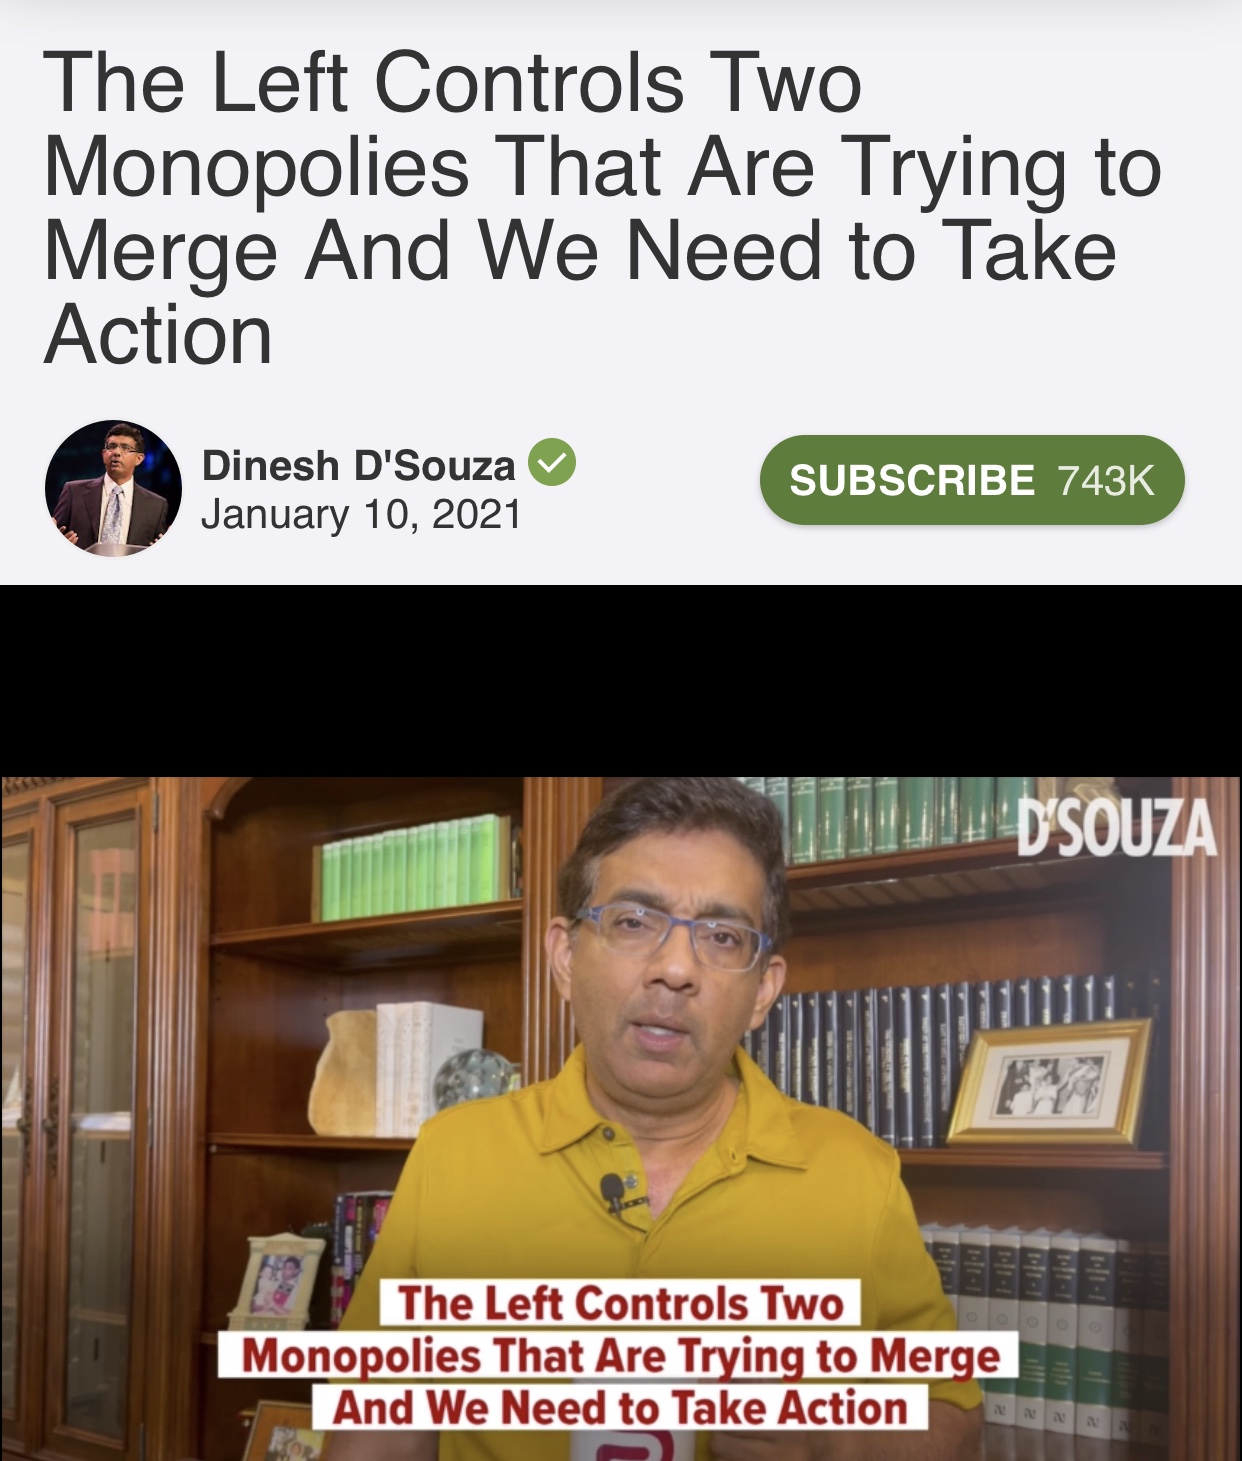 The Left Controls Two Monopolies That Are Trying to Merge and We Need to Take Action